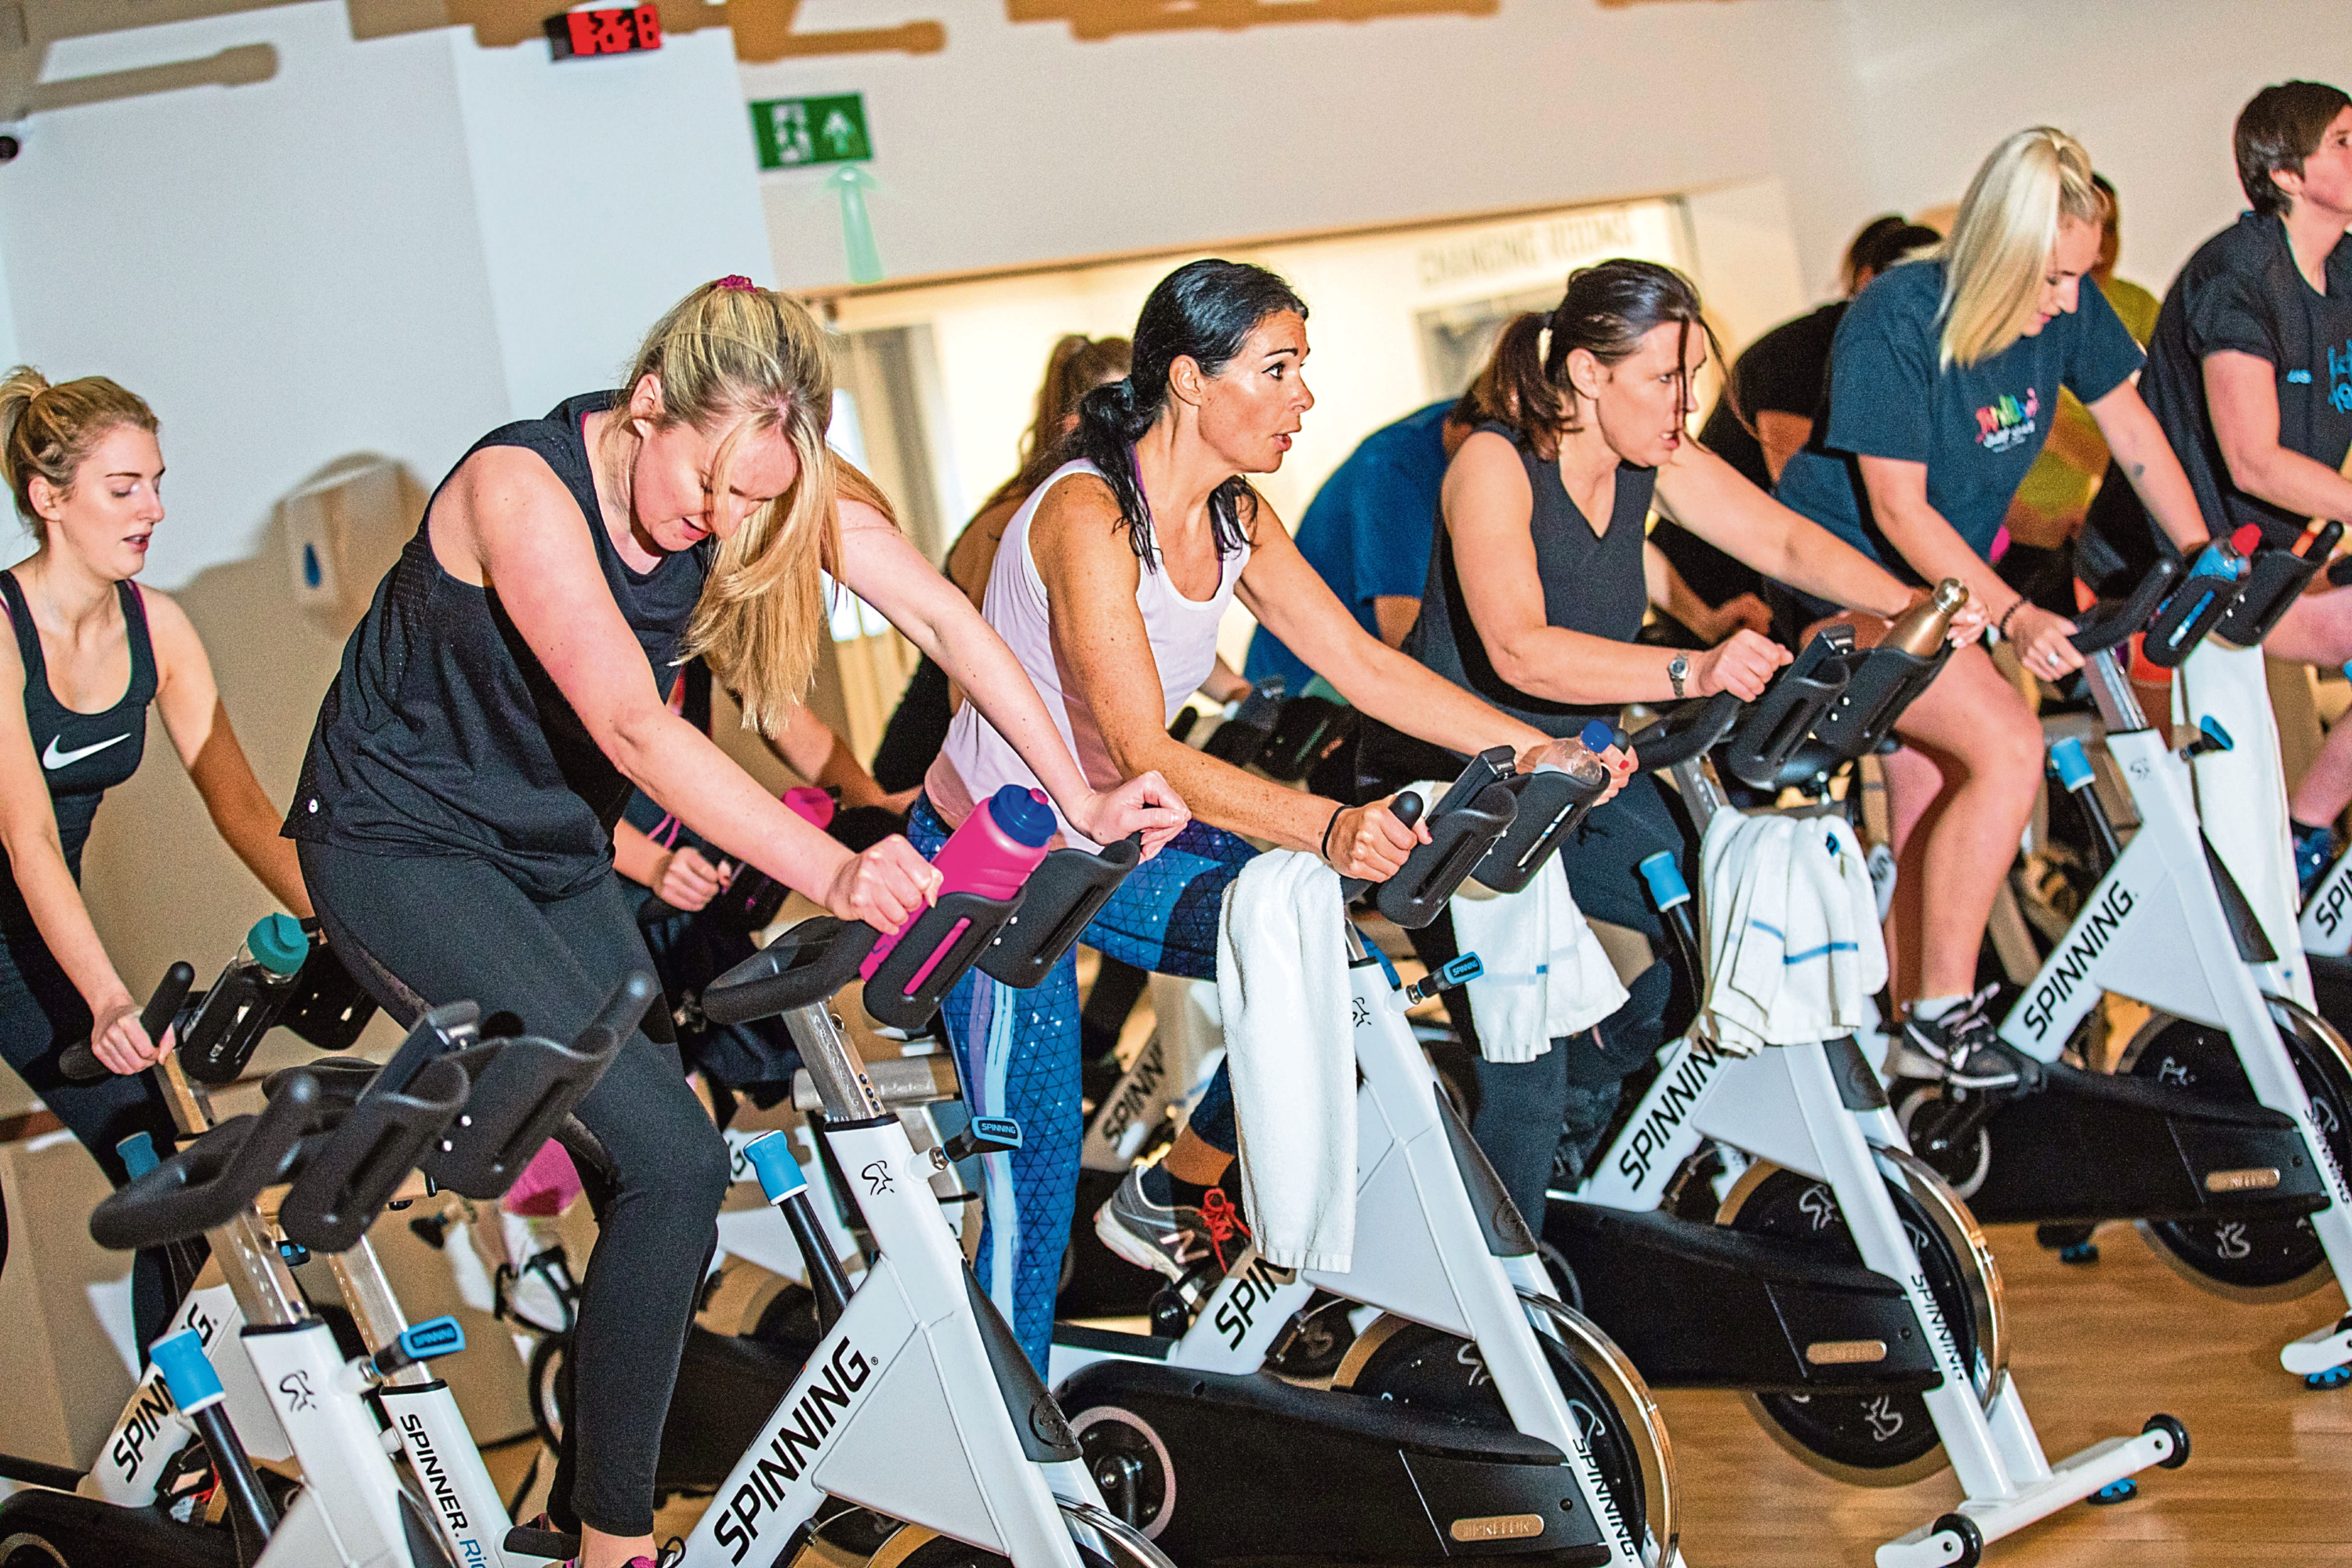 Gayle joins a spin class at Crieff Hydro and checks out the new gym facilities.